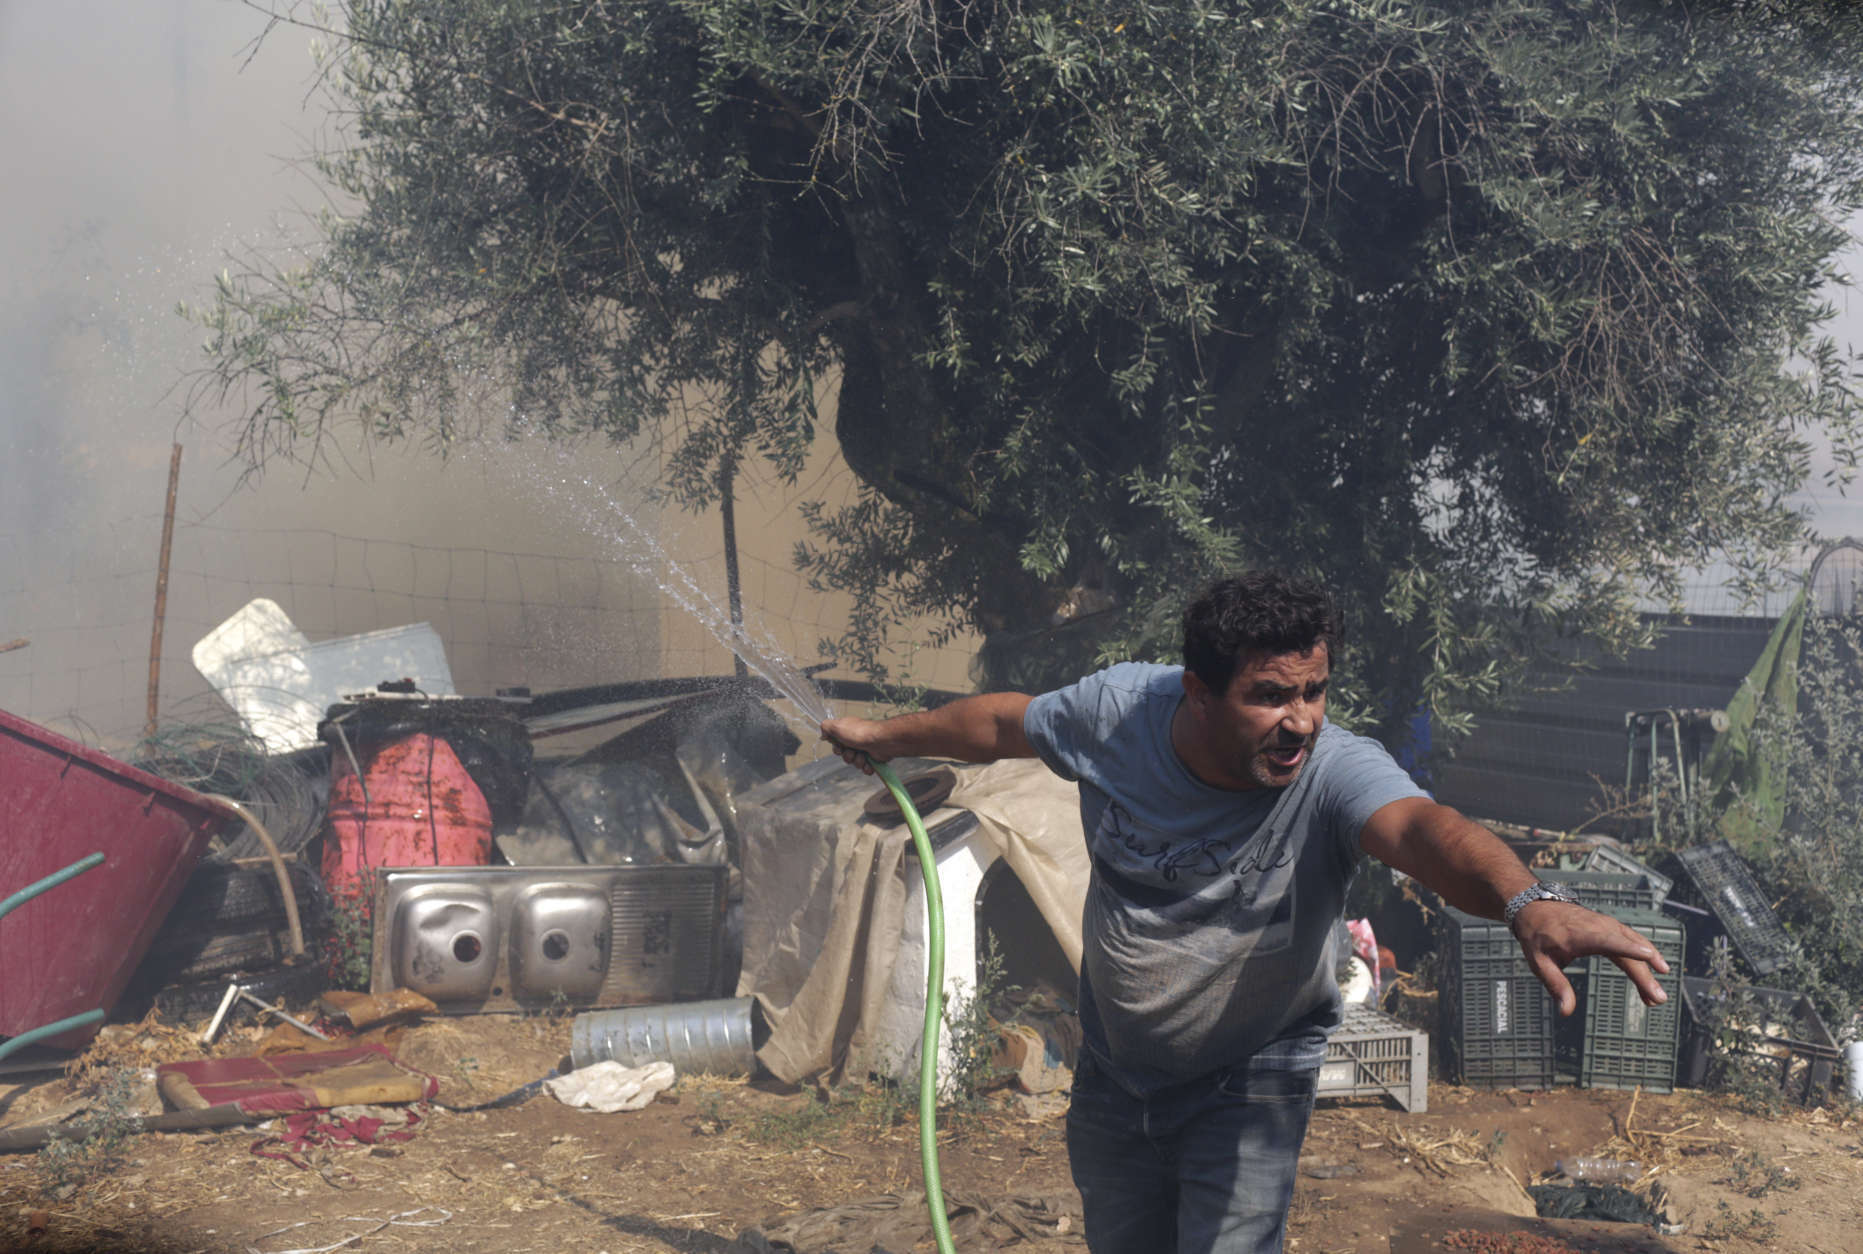 A man holding a garden hose shouts to someone as flames from a wildfire reach the backyard of a house in the town of Macao, central Portugal, Thursday, Aug. 17 2017. Portugal's government is taking the rare step of decreeing a state of public calamity ahead of a forecast rise in temperatures that authorities fear will worsen a spate of wildfires. (AP Photo/Armando Franca)